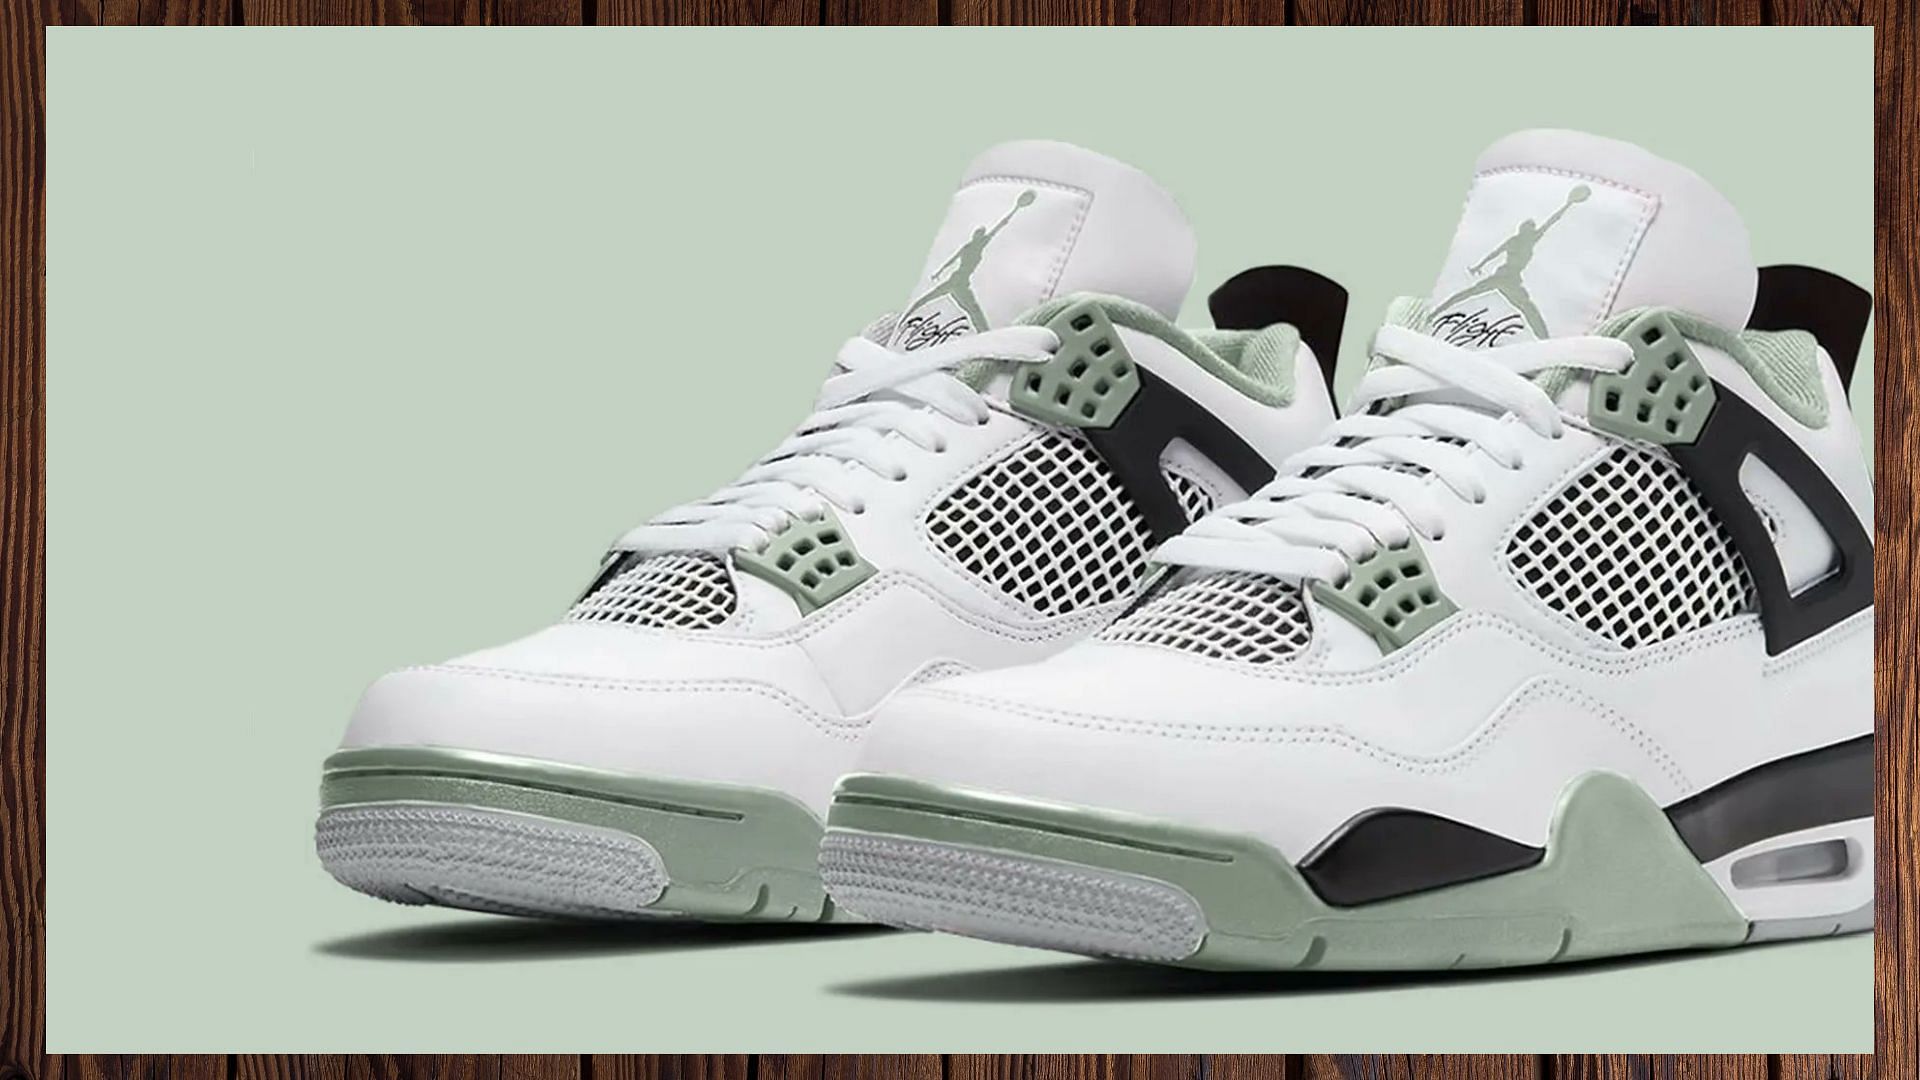 Where to buy Air Jordan 4 Seafoam shoes? Release date and more details ...